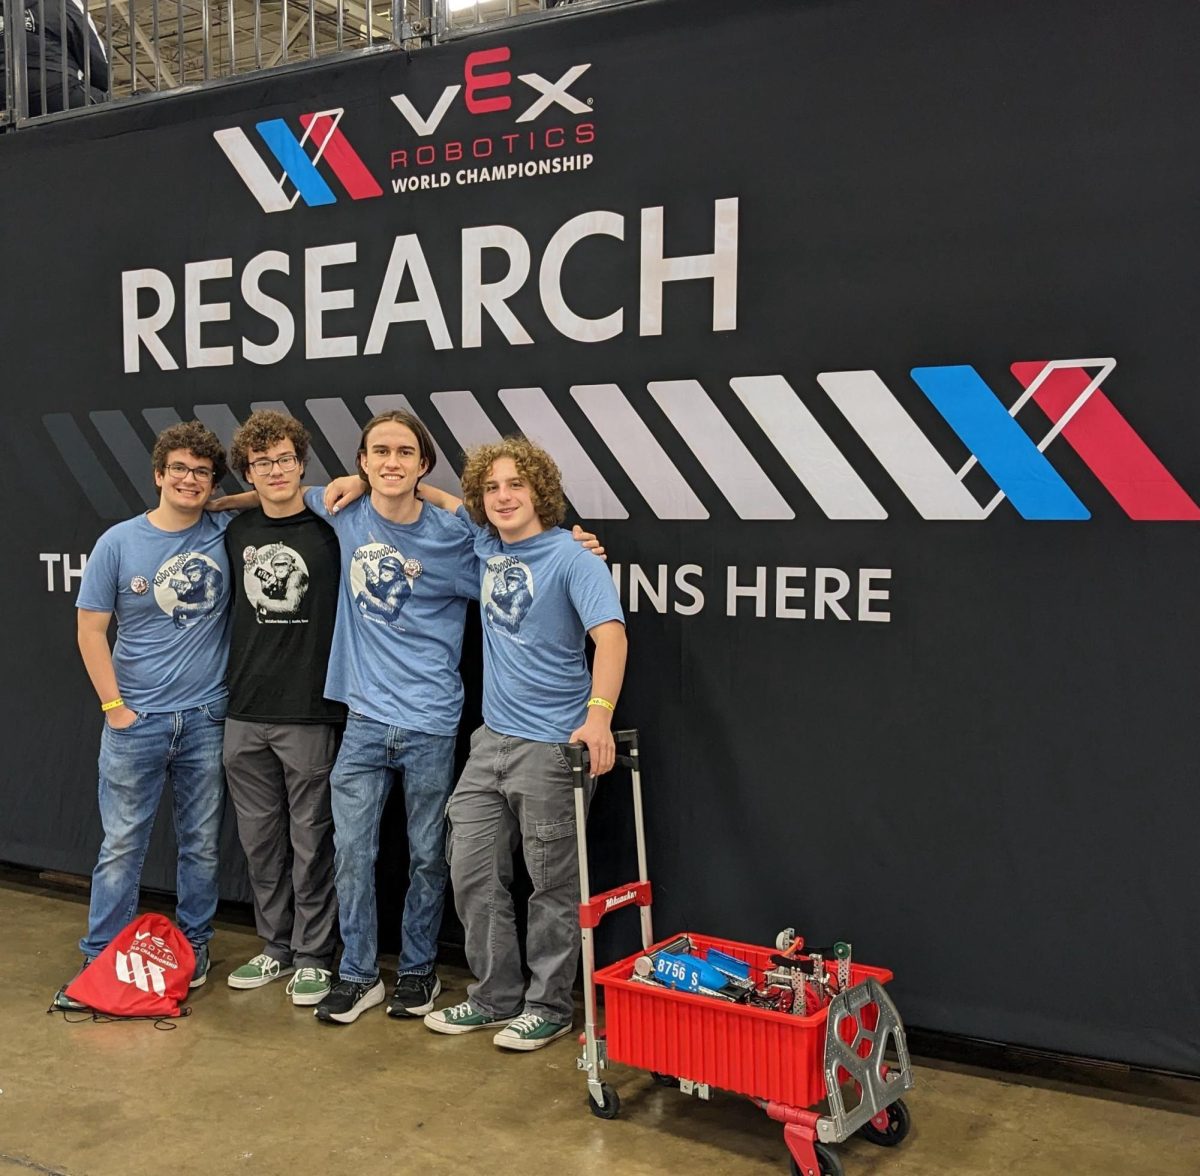 Seniors Zane Wiggins,Felix Murdock, Henry Holmes and Jesse Silverman at the VEX Robotics World Championships taking place this weekend at the Kay Bailey Hutchison Convention Center in Dallas. The team finished the qualification round at 5-5.